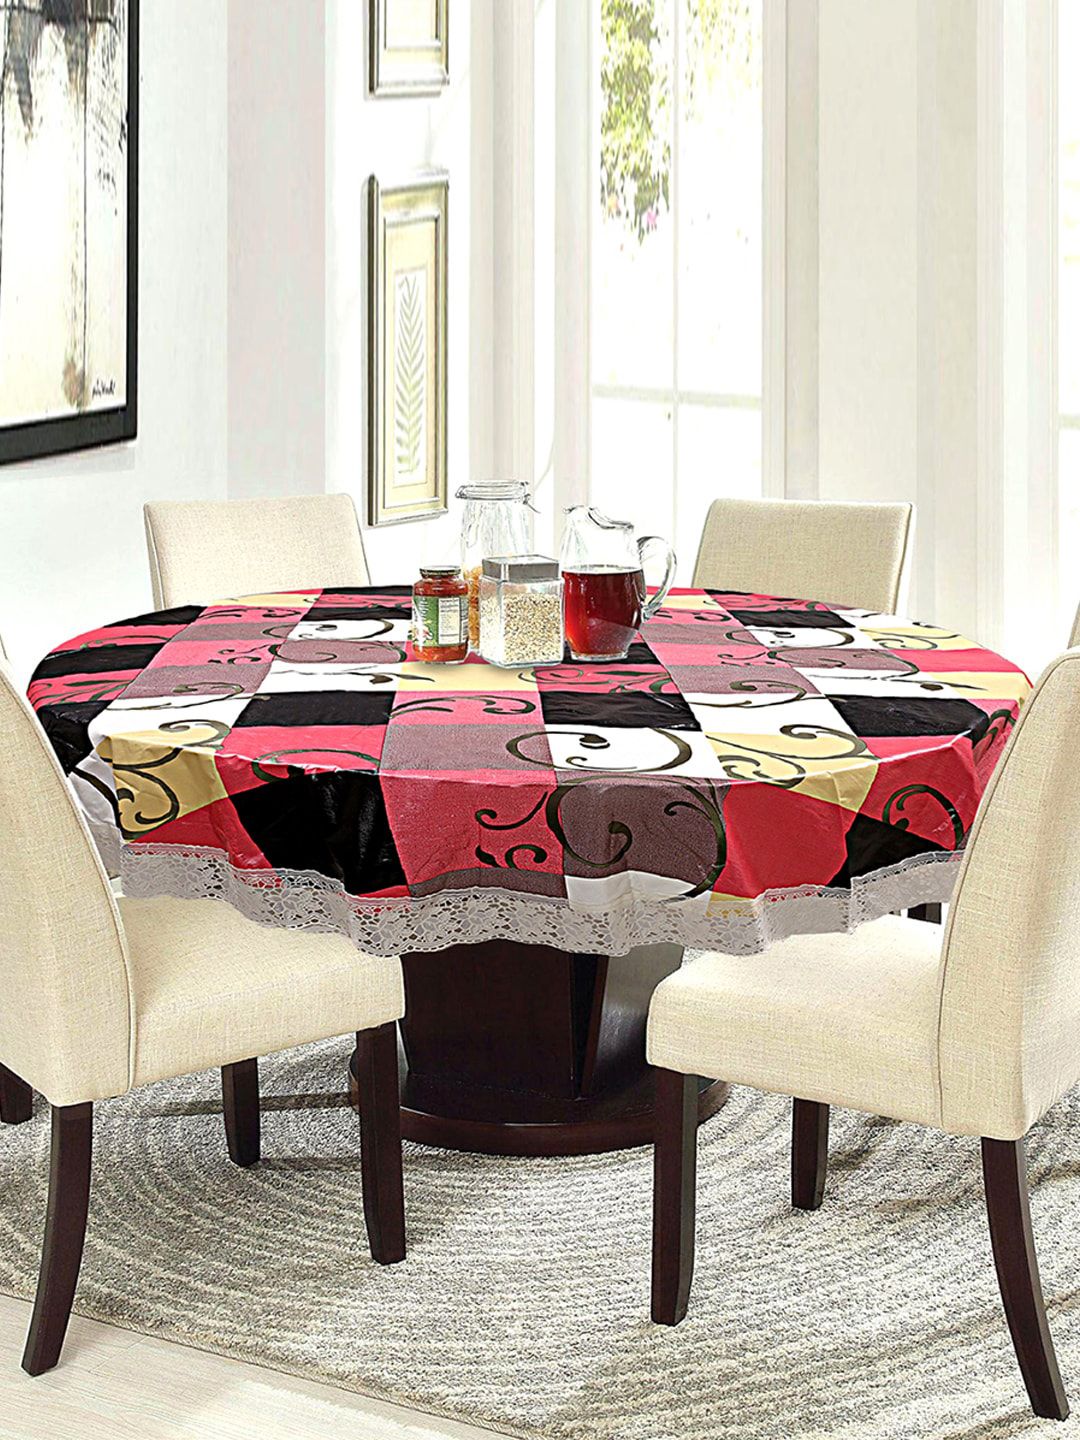 Kuber Industries Multicoloured Printed 6 Seater Round Table Cover Price in India